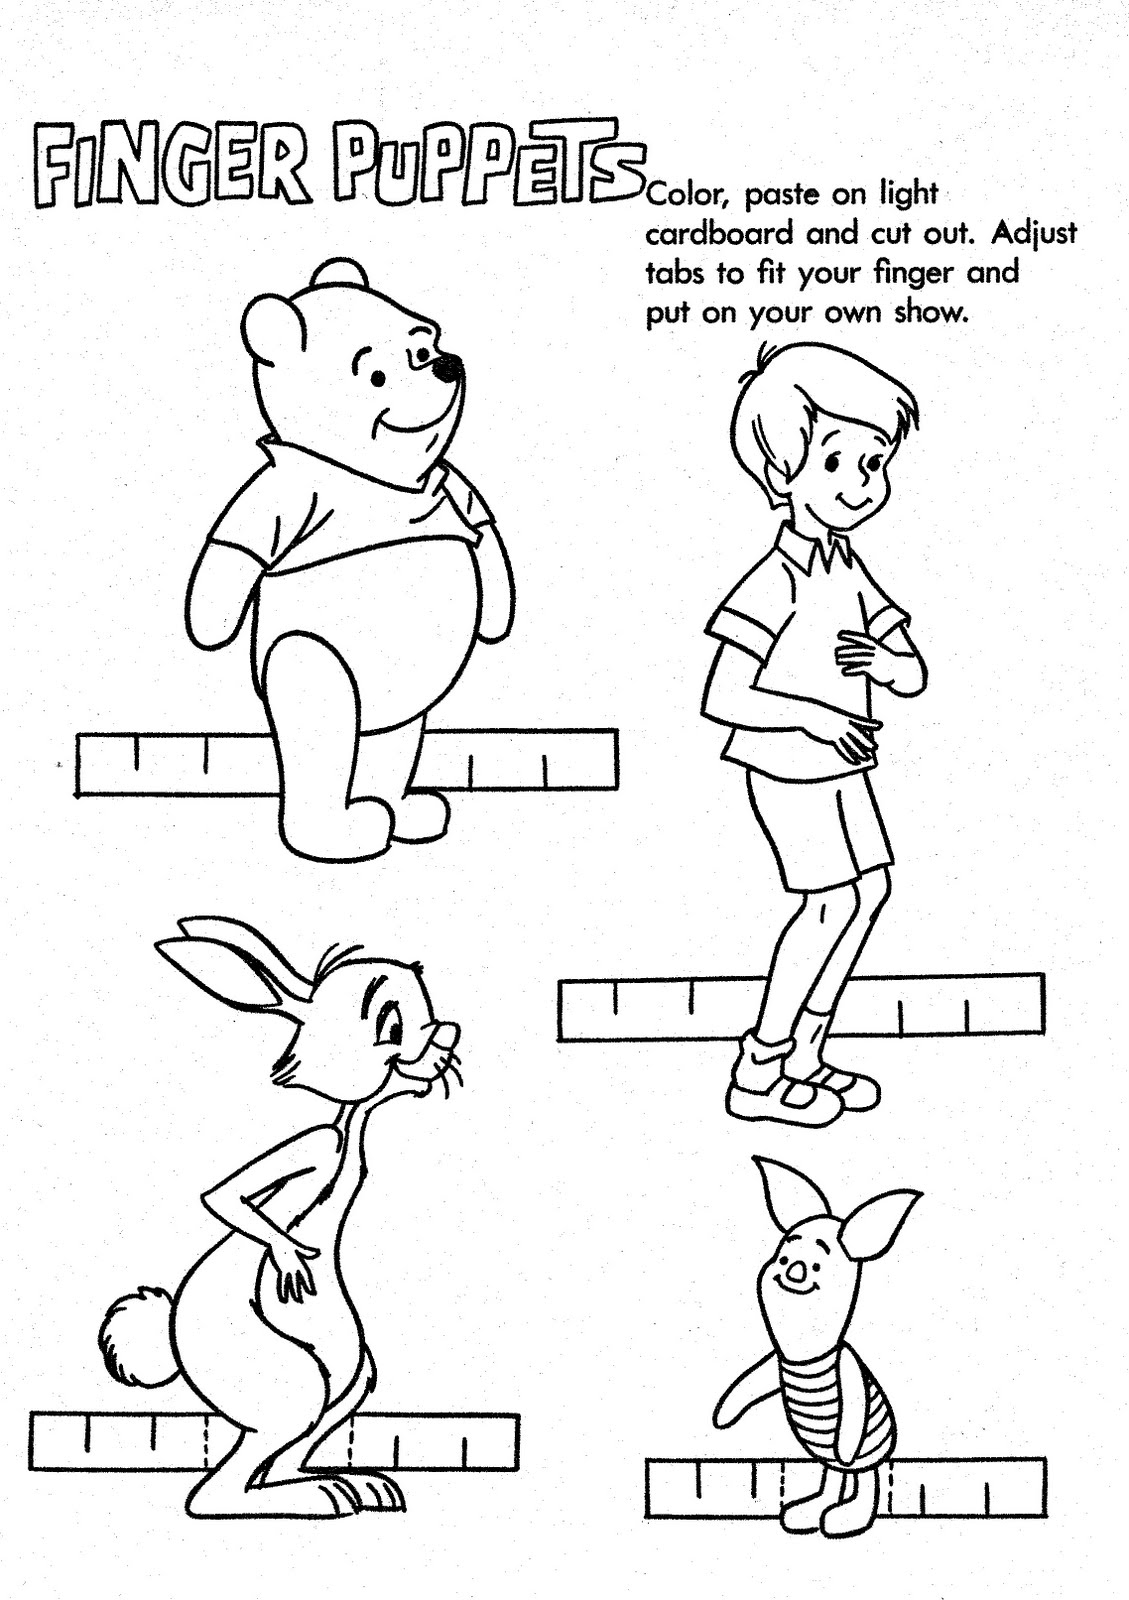 Mostly Paper Dolls WINNIE THE POOH Finger Puppets